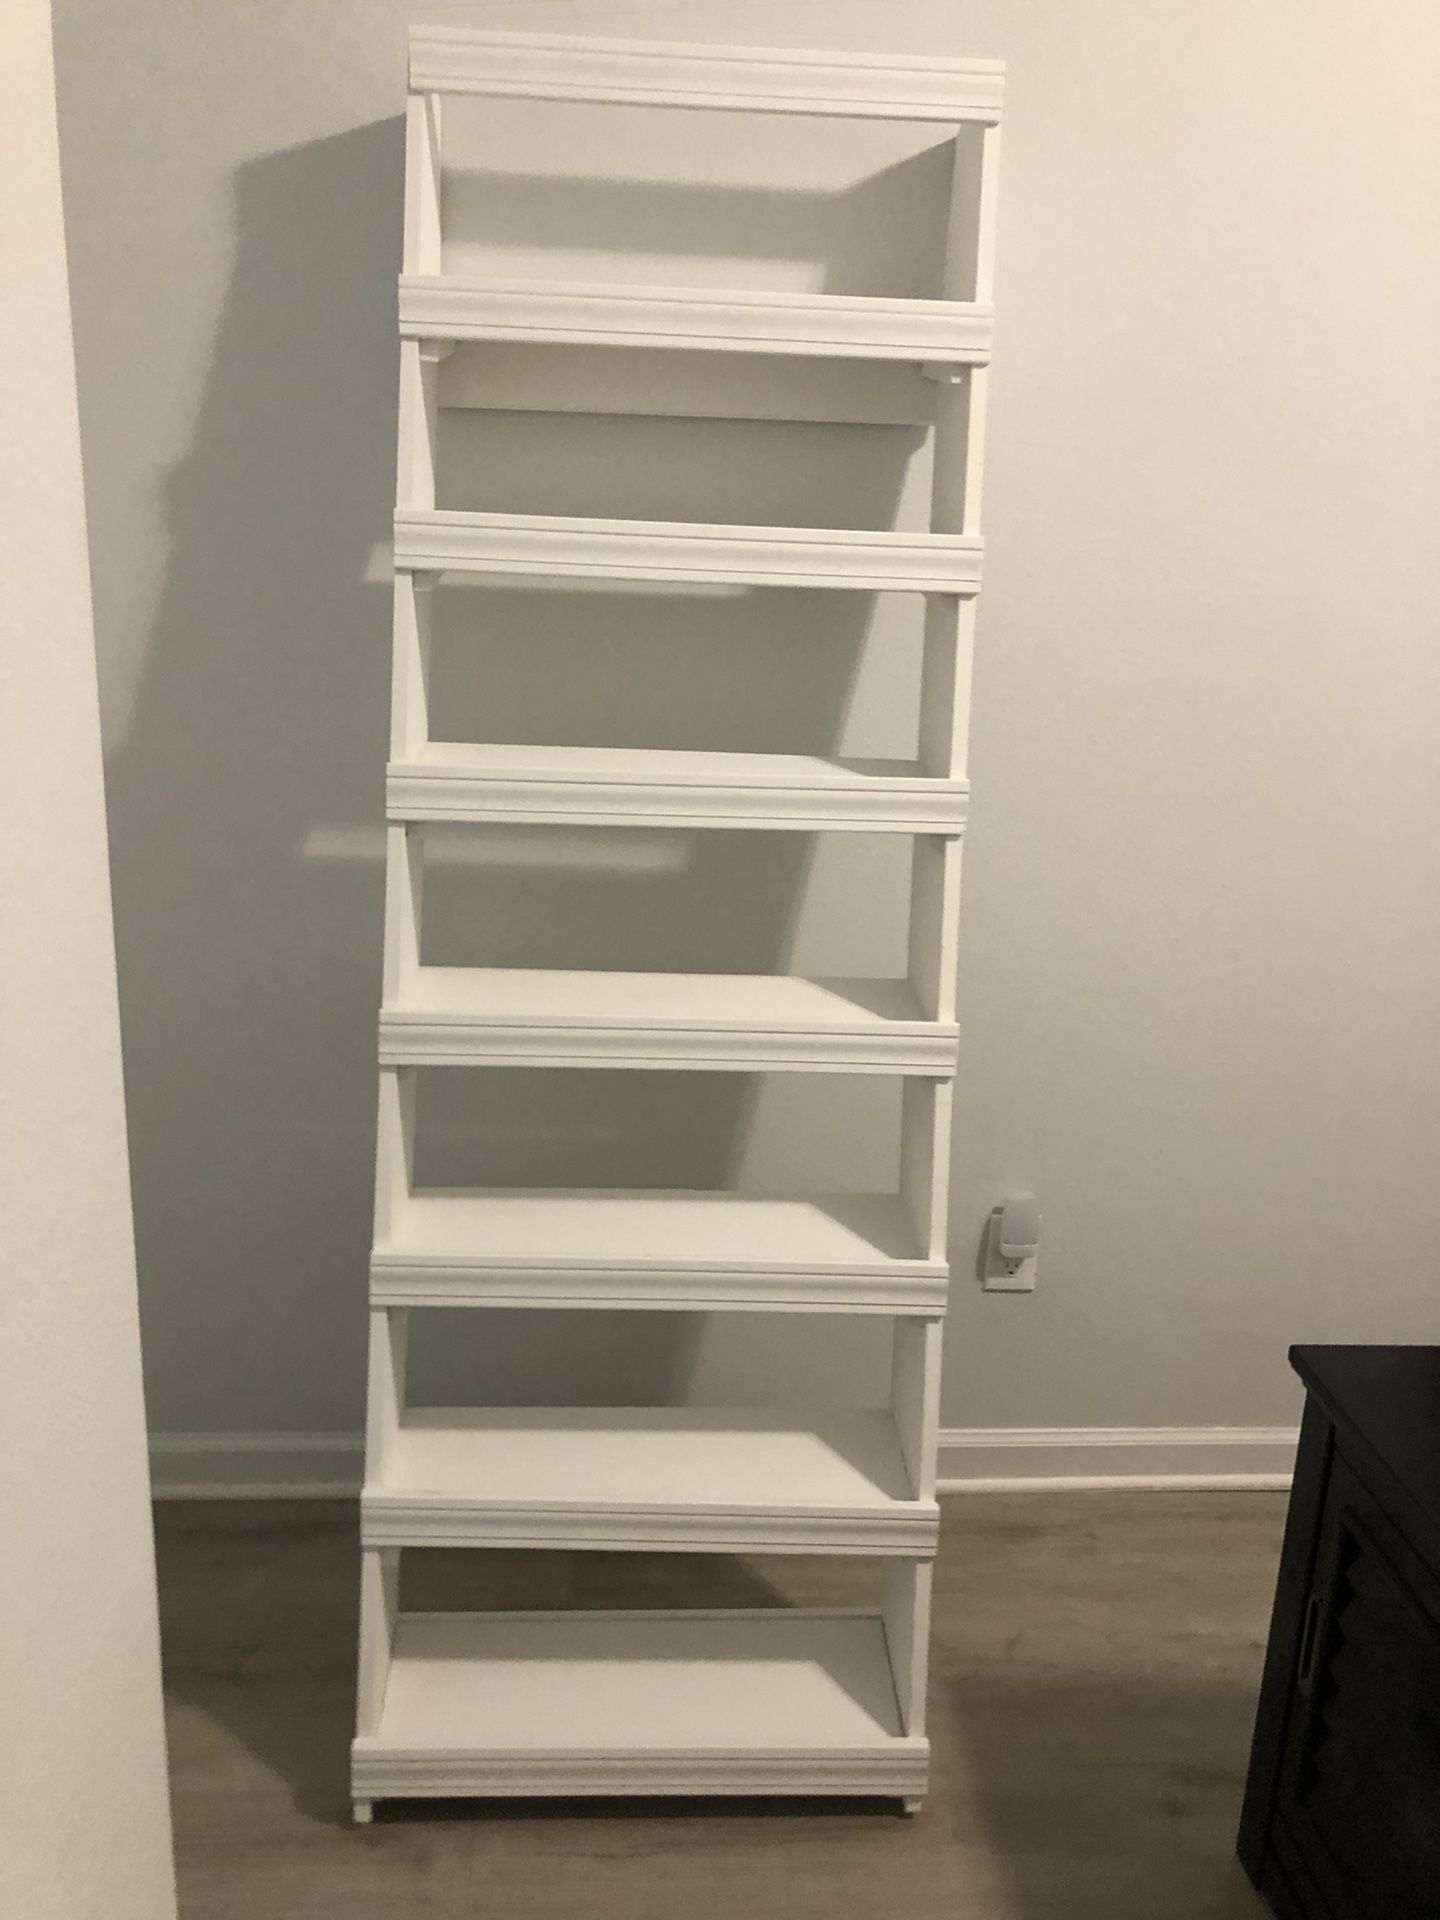 Ladder Shelf For Shoes With Capacity 30 Pairs 